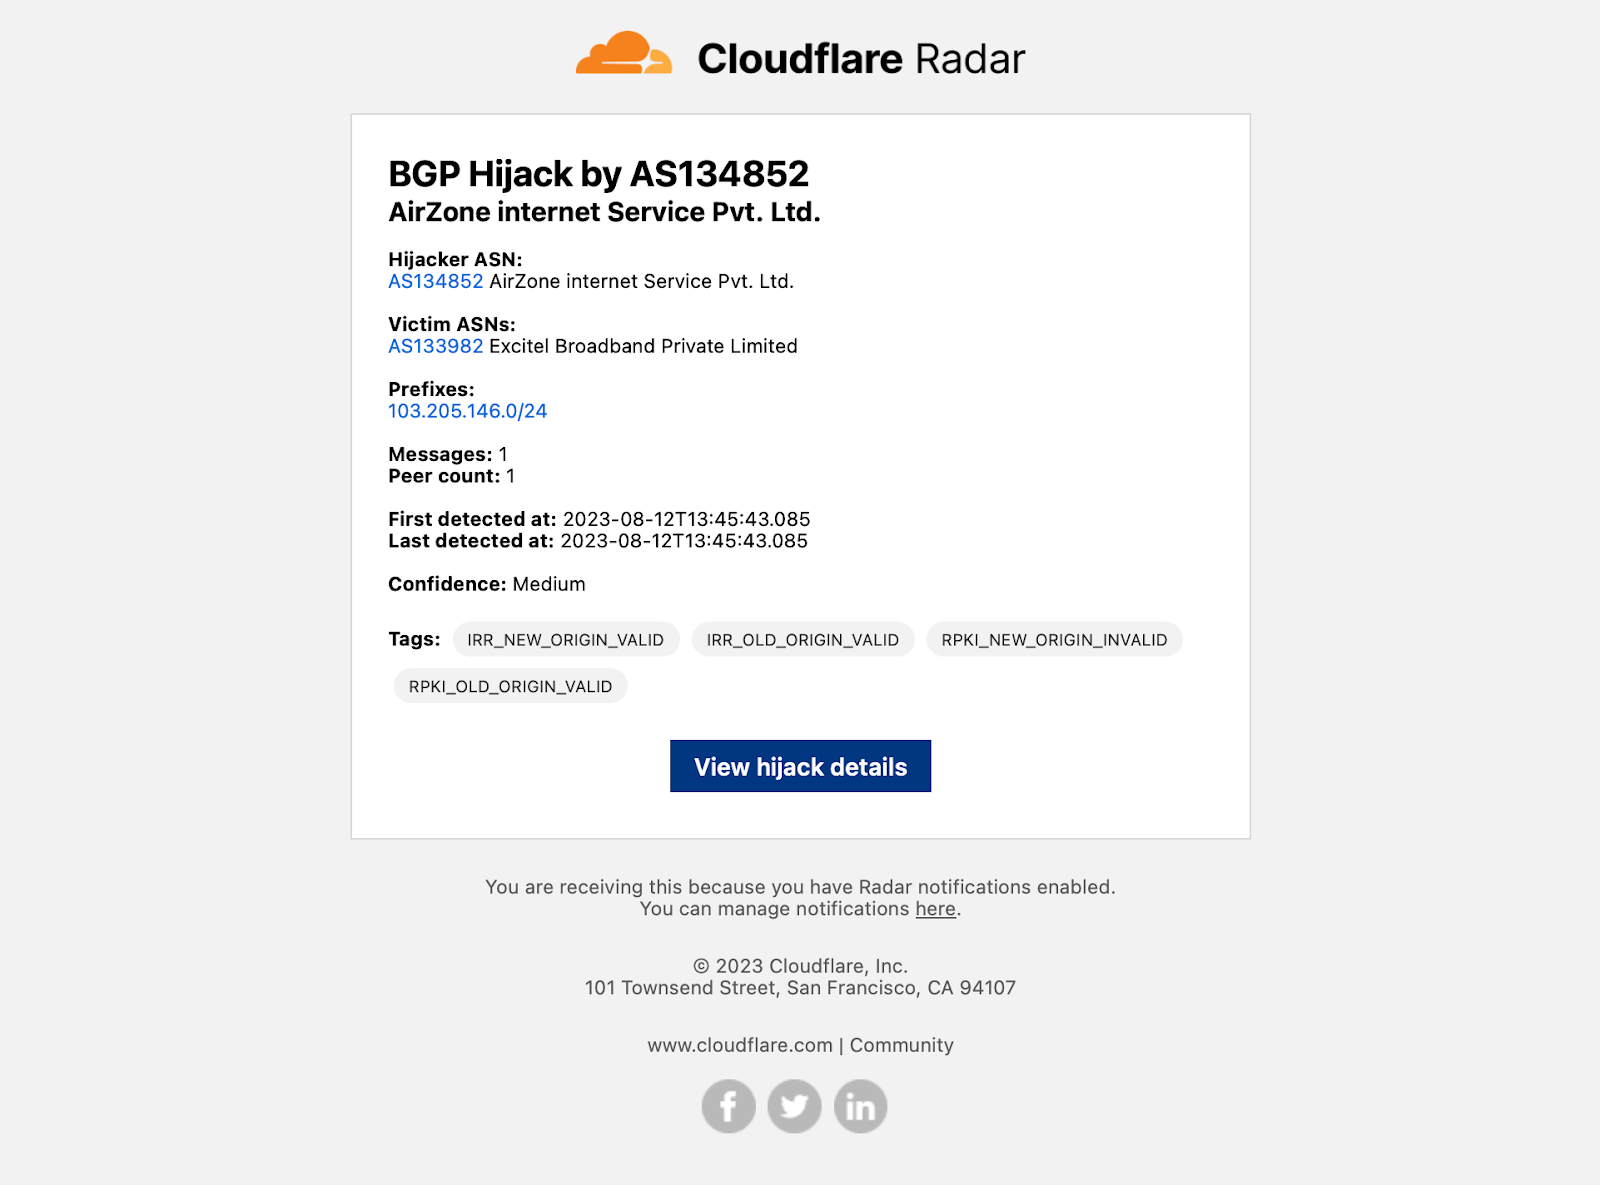 Traffic anomalies and notifications with Cloudflare Radar